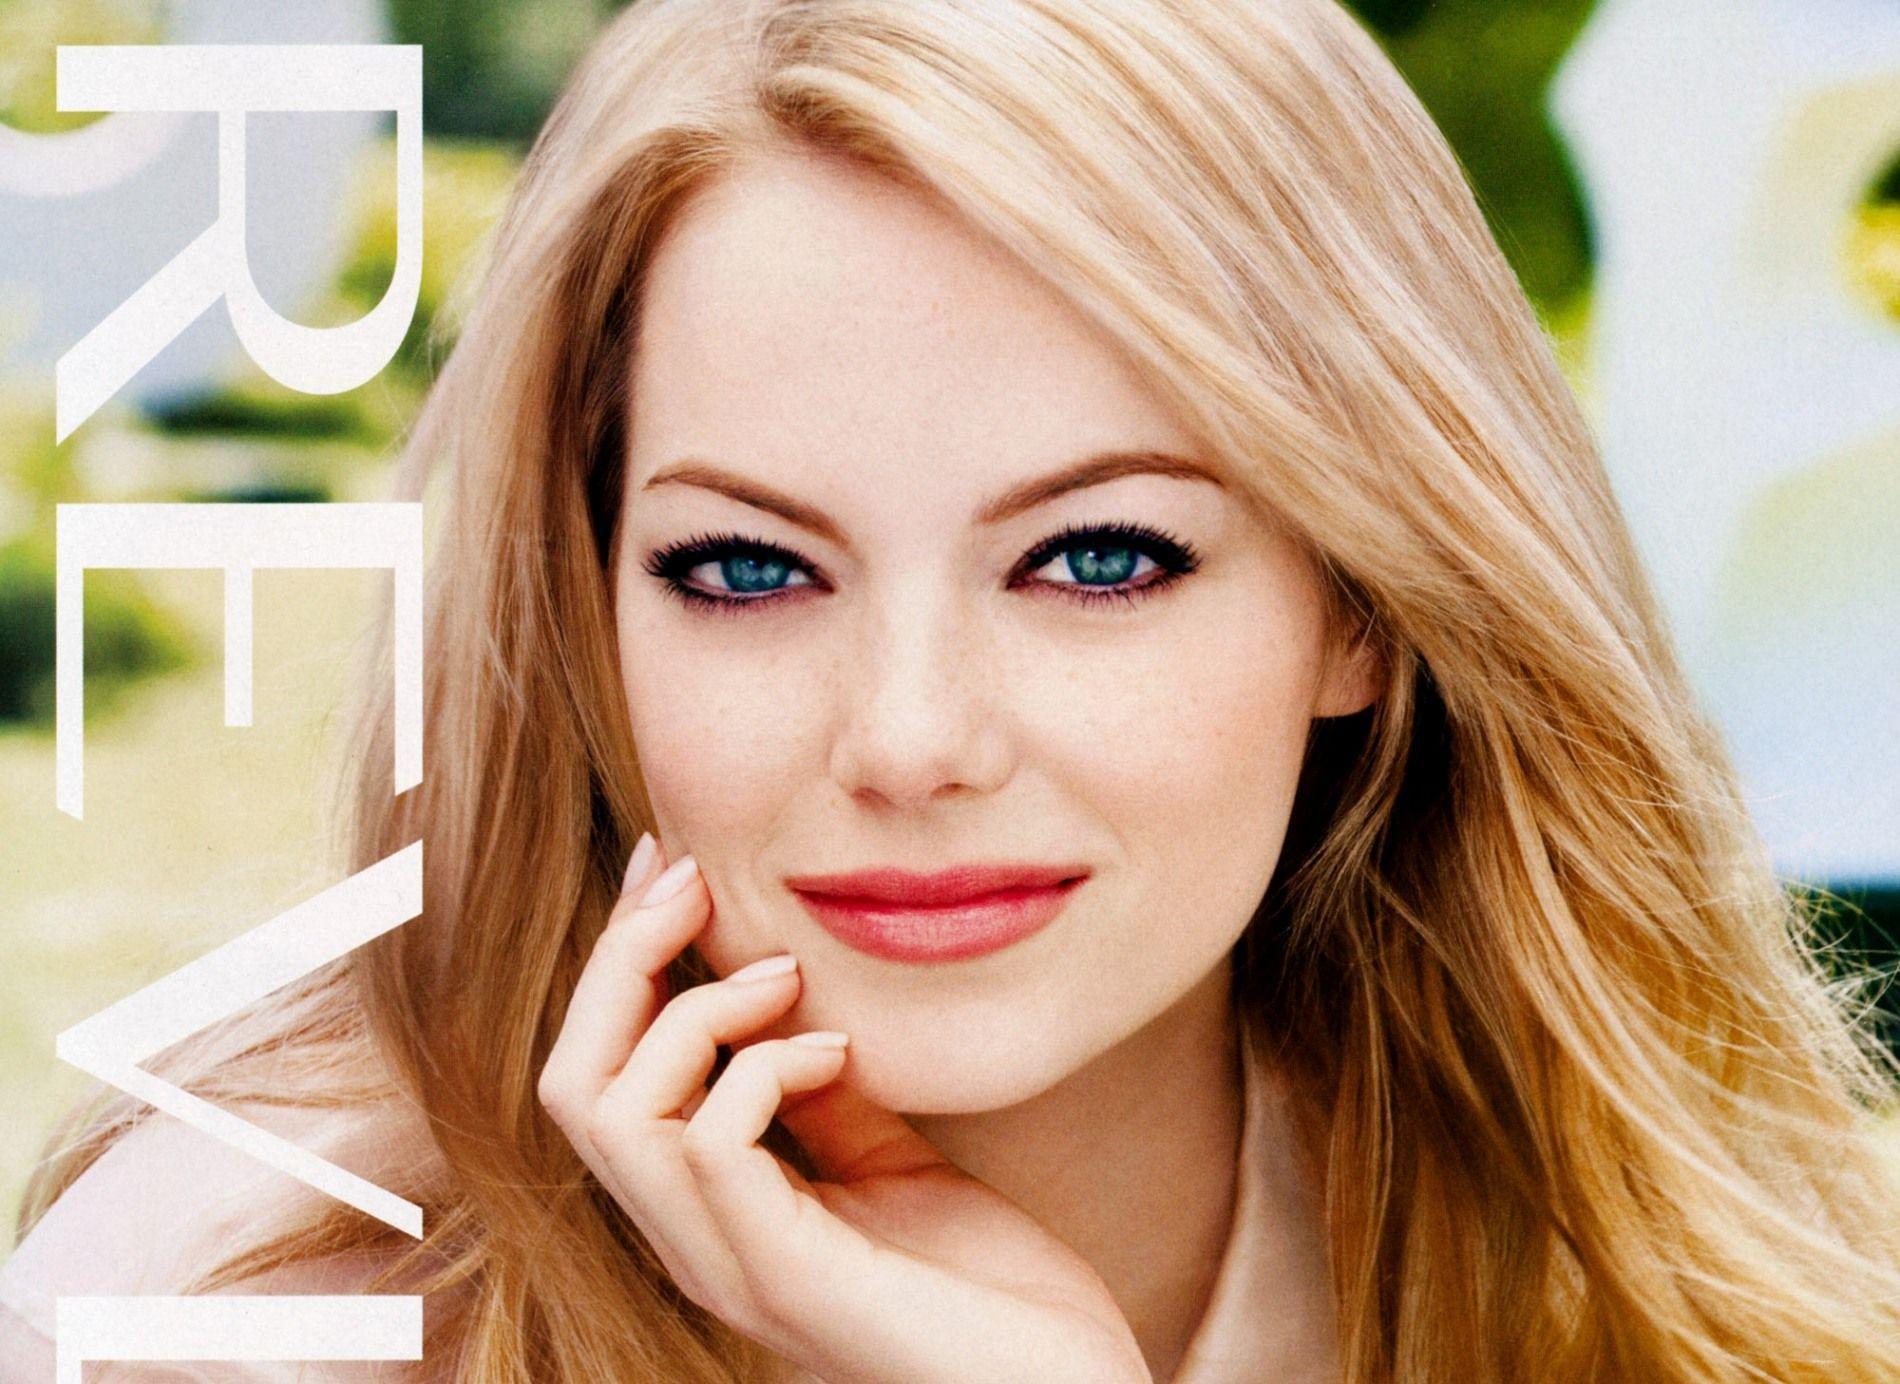 Interesting Emma Stone Image, Picture And Photo